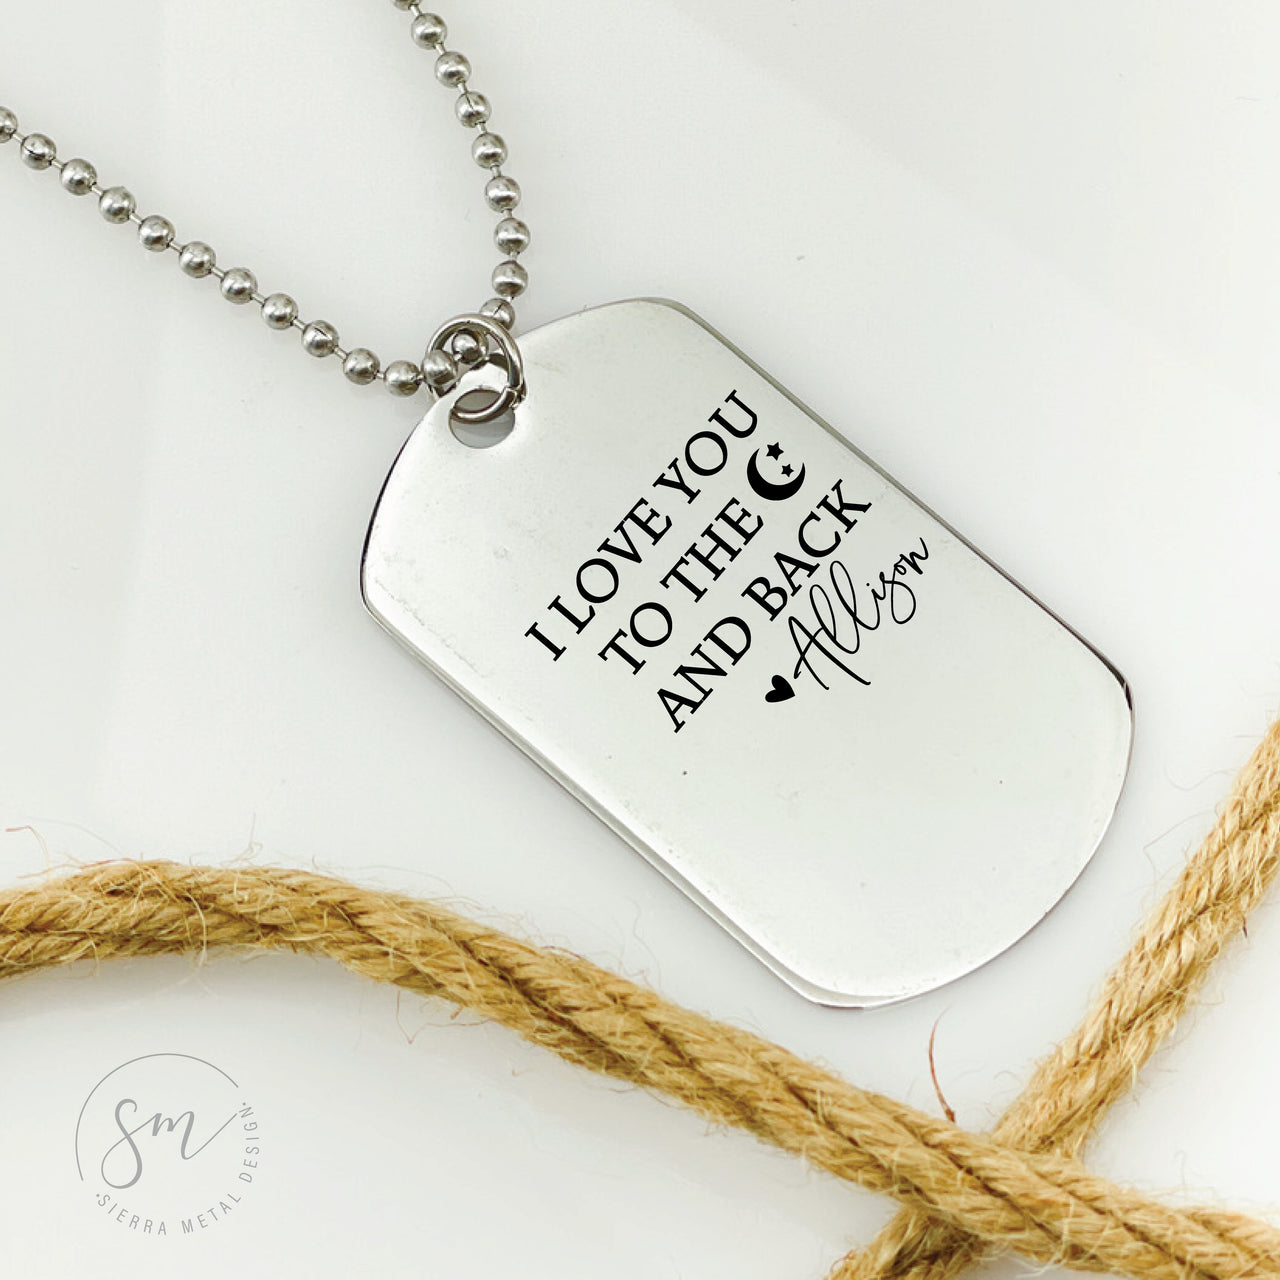 Dog Tag I Love You To The Moon And Back Necklace